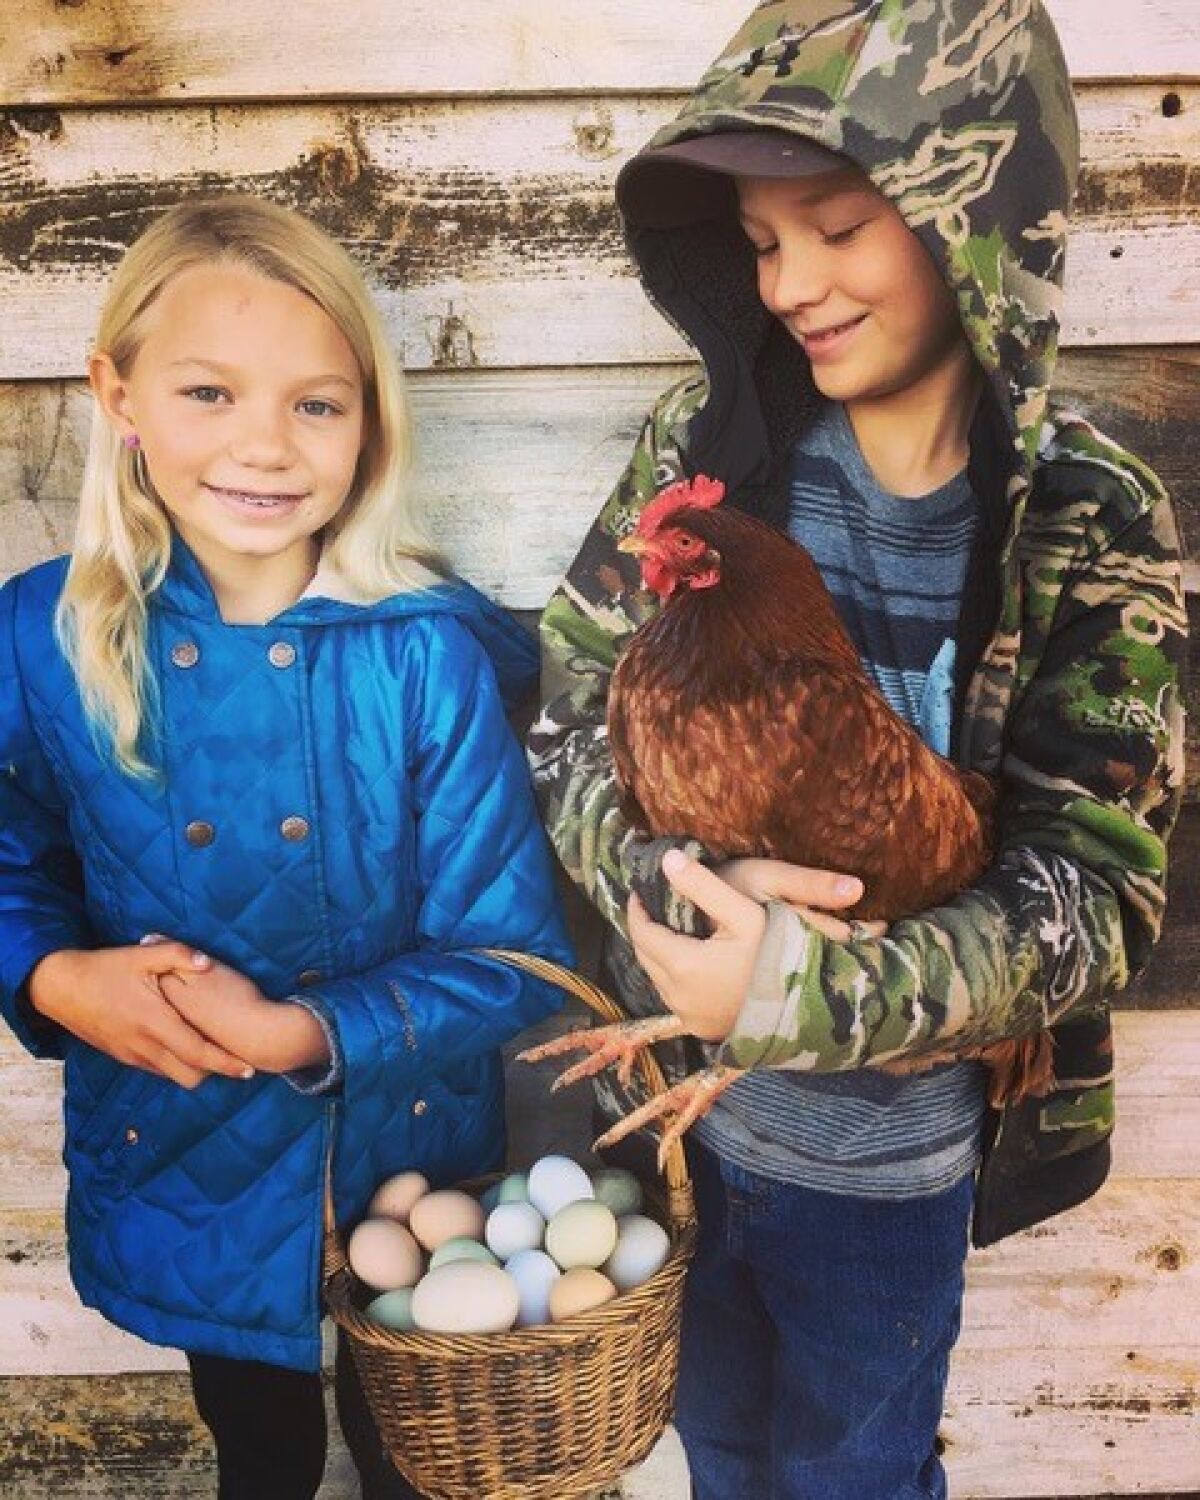 Charlie and her twin brother, Wesley, both 9, show off fresh eggs from some of the family’s chickens.